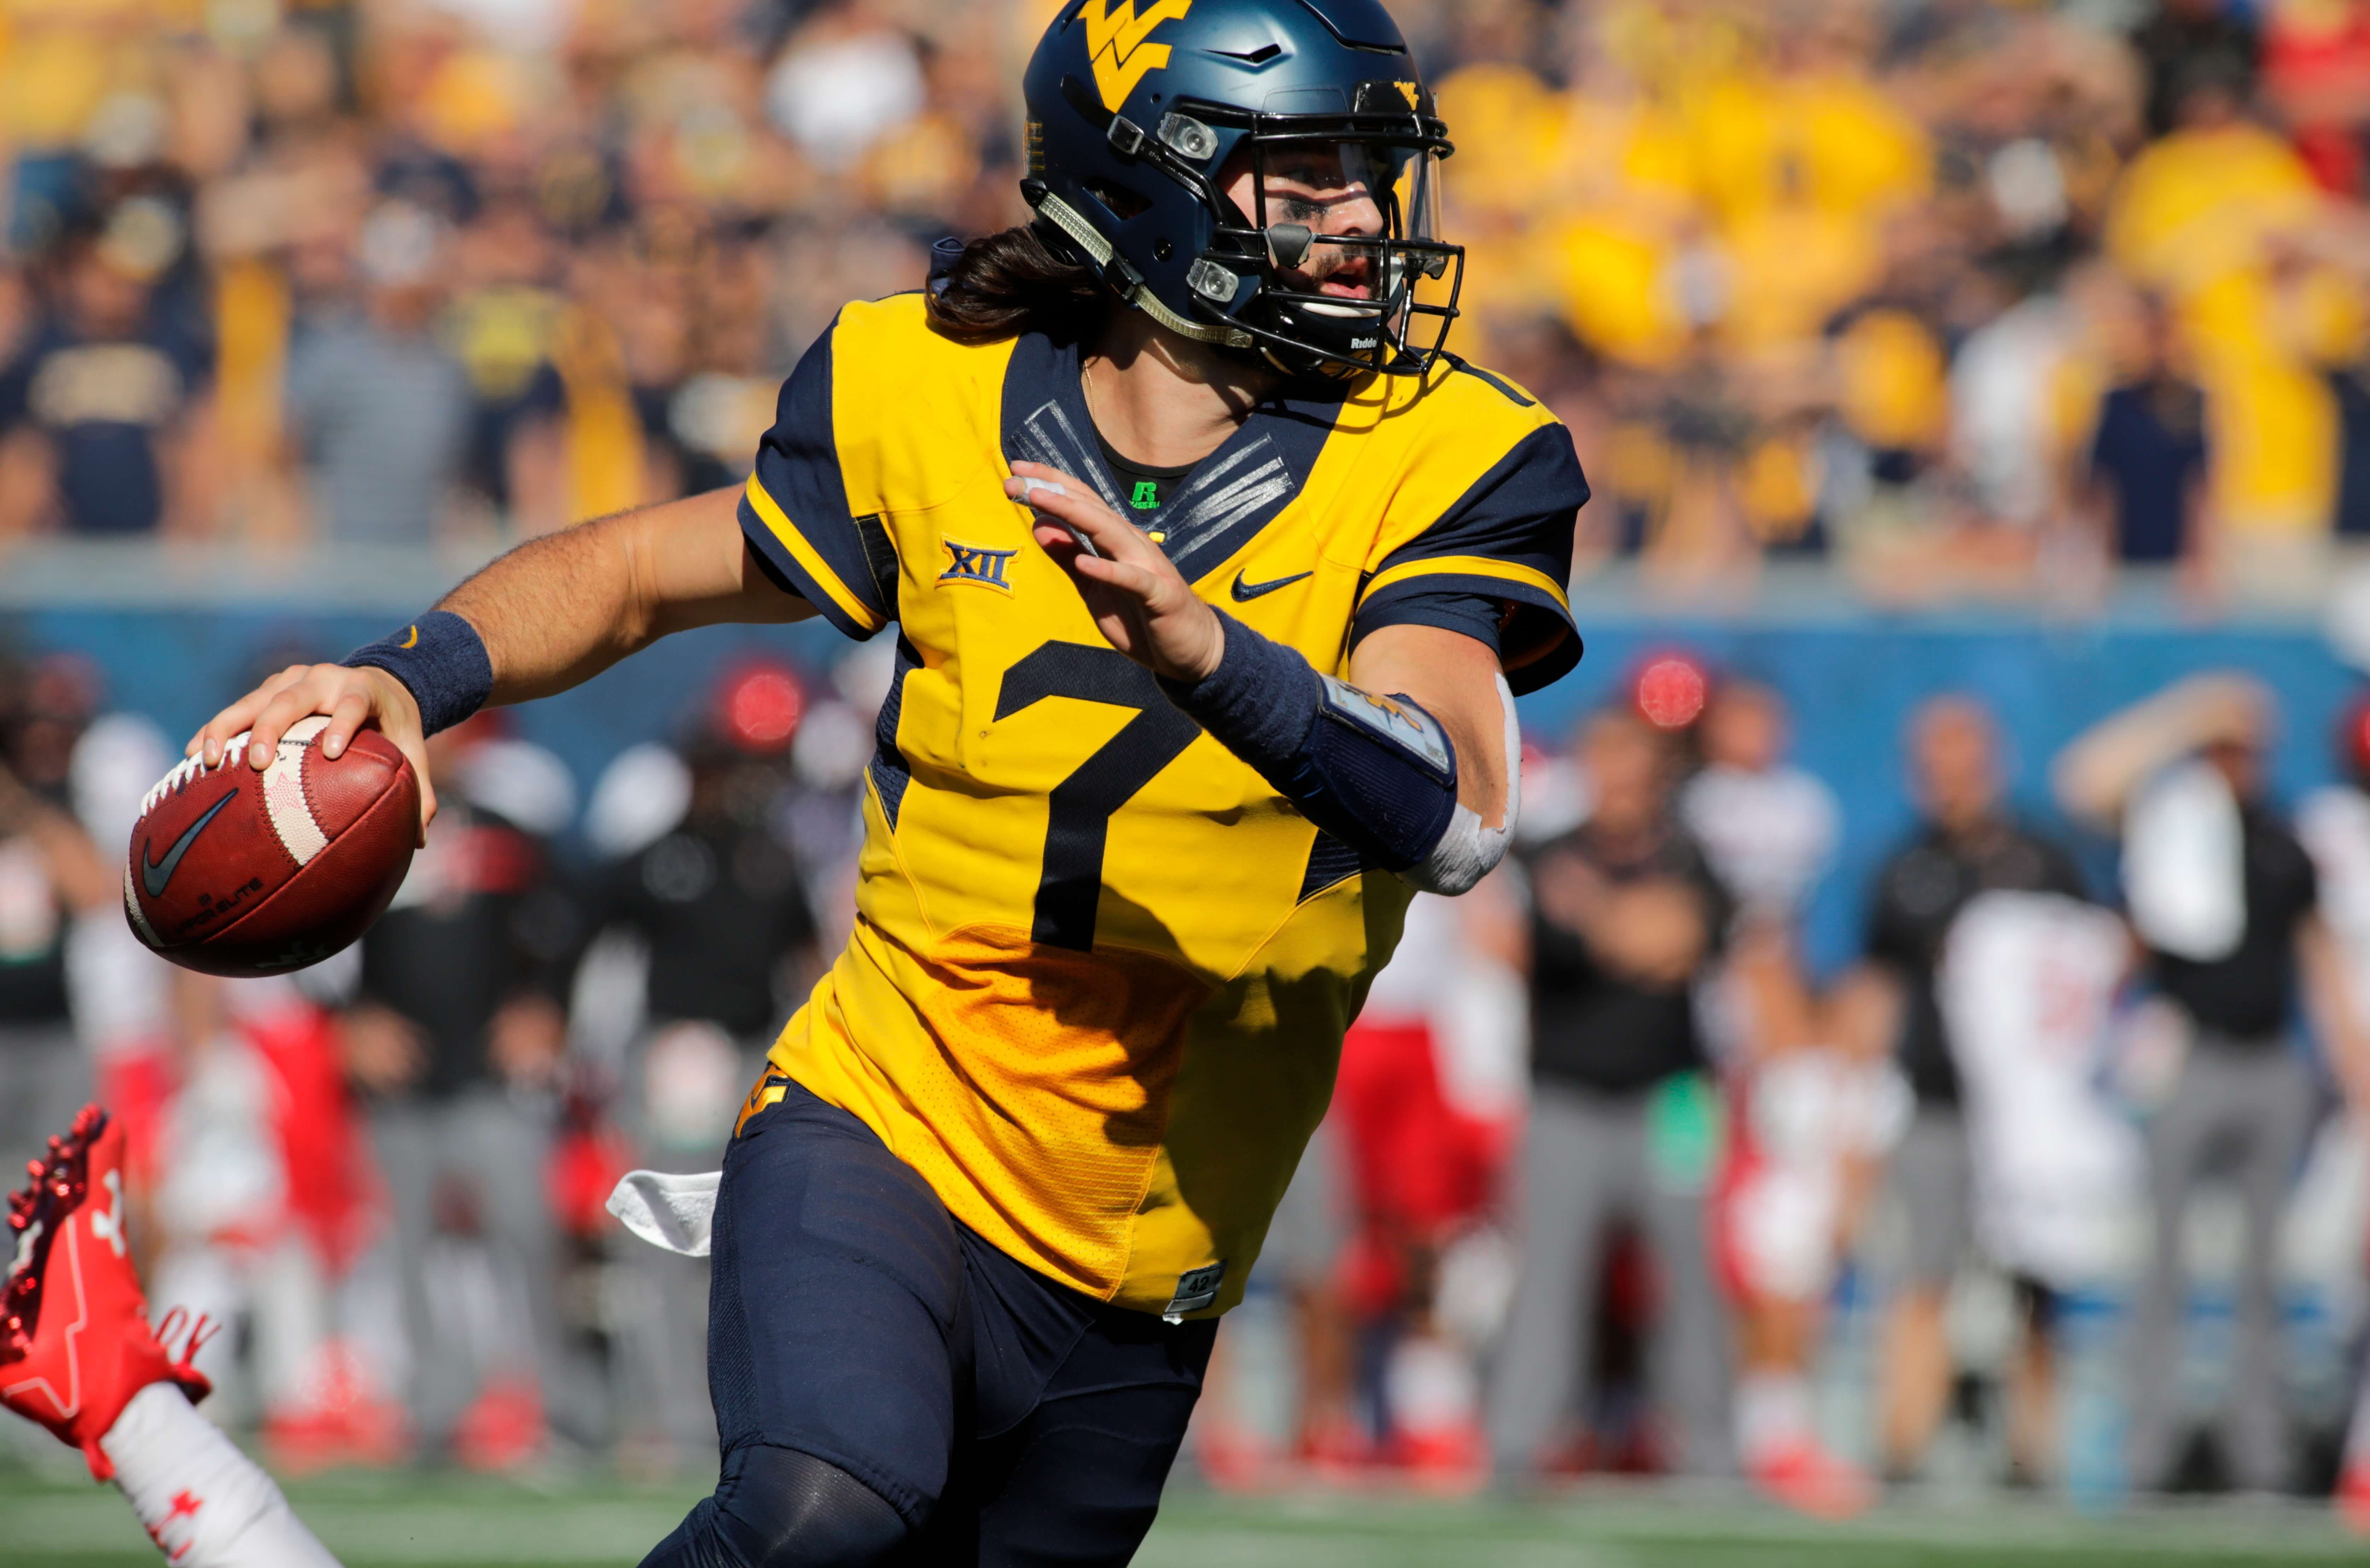 In this Oct. 14, 2017, file photo, West Virginia quarterback Will Grier (7) looks to pass against Texas Tech during an NCAA college football game in Morgantown, W.Va. While the Sooners are still the preseason favorite again, there are also high expectations for Grier, the preseason Big 12 offensive player of the year who threw 34 touchdowns and 3,490 yards in his injury-shortened WVU debut.